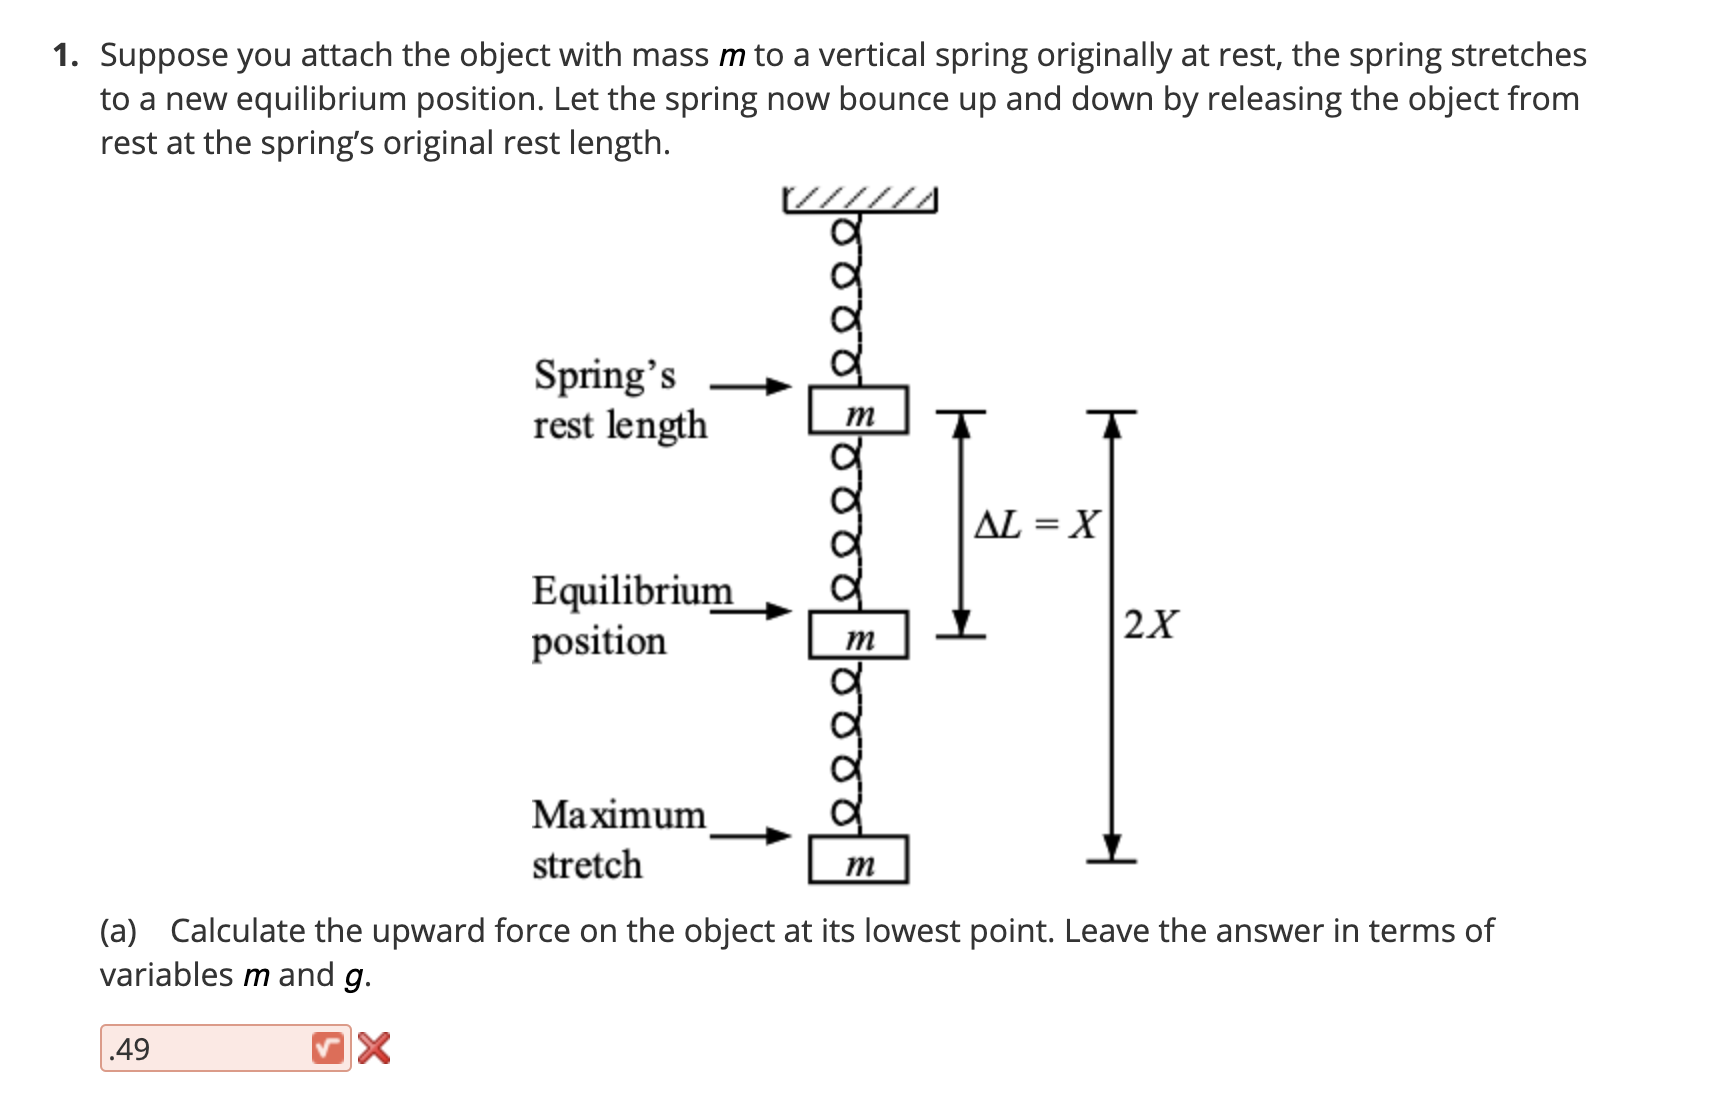 Suppose you attach the object with mass m to a vertical spring originally at rest, the spring stretches
to a new equilibrium position. Let the spring now bounce up and down by releasing the object from
rest at the spring's original rest length.
/////
Spring's
rest length
AL = X
Equilibrium
position
2X
m
Мaximum
stretch
m
(a) Calculate the upward force on the object at its lowest point. Leave the answer in terms of
variables m and g.
